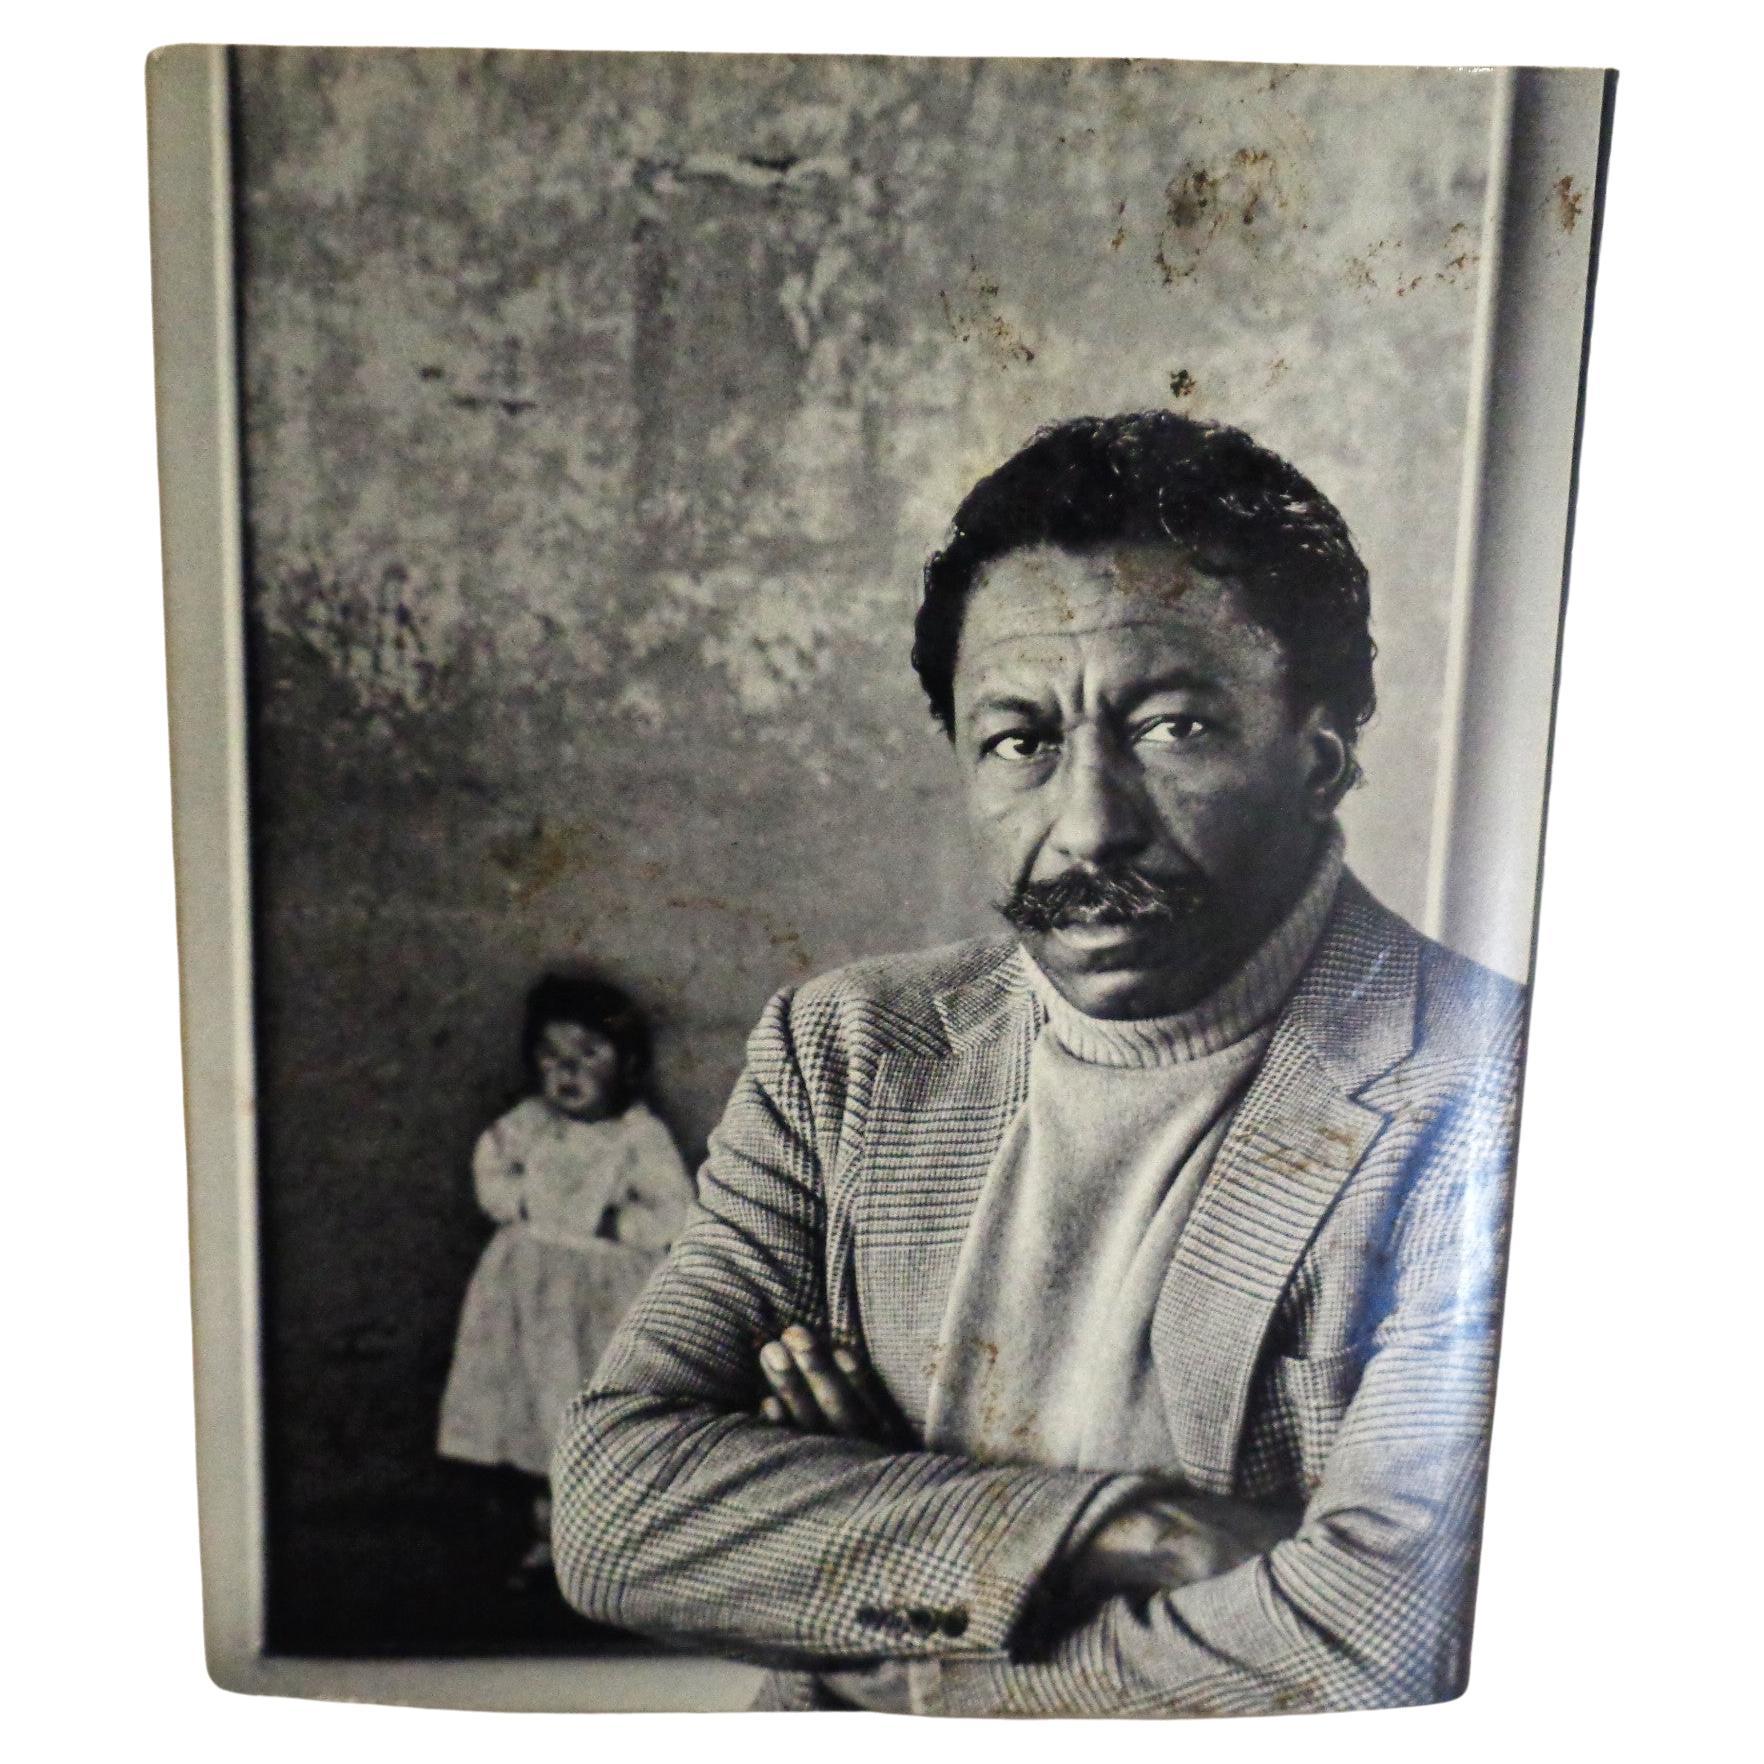 American Gordon Parks - A Poet and His Camera - Gordon Parks - 1968 Viking - 1st Edition For Sale